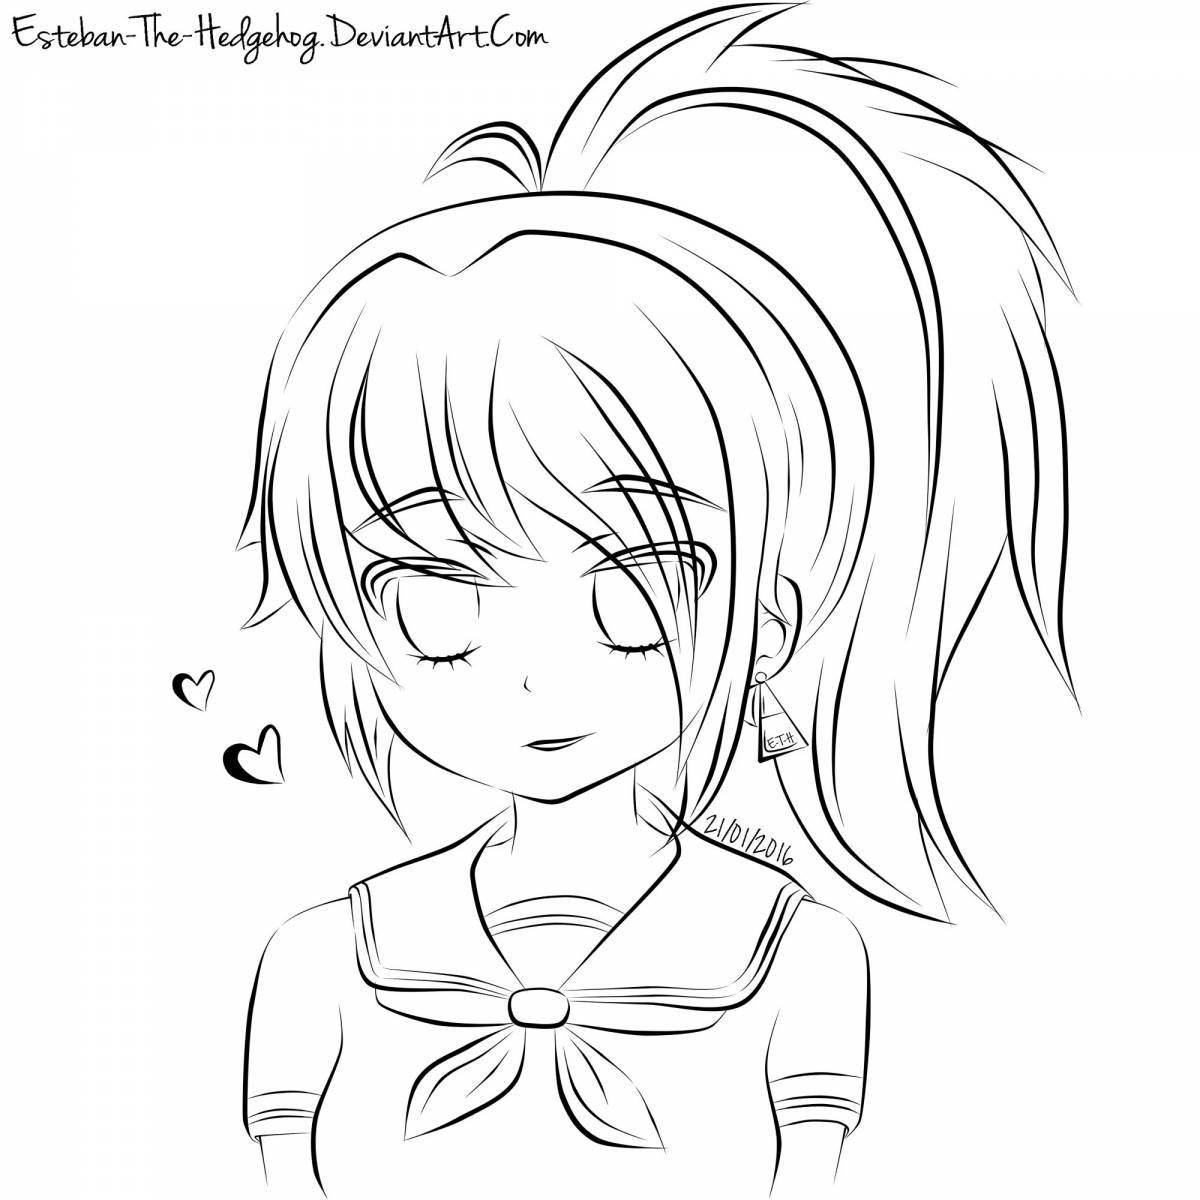 Dyed yandere simulator coloring page